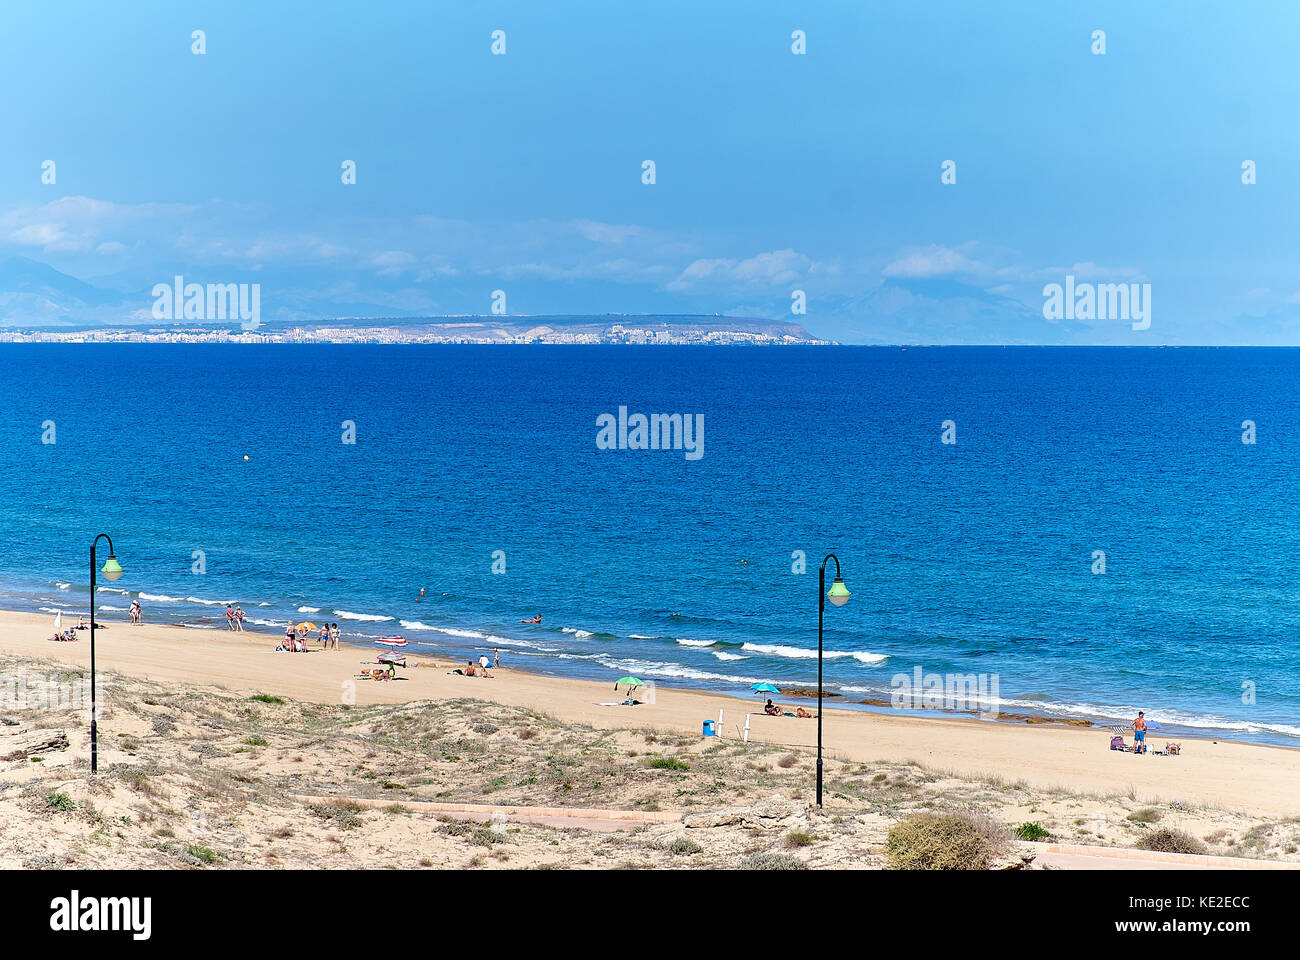 People on the beach of La Mata. Torrevieja city. Costa Blanca, Province of Alicante. Spain Stock Photo